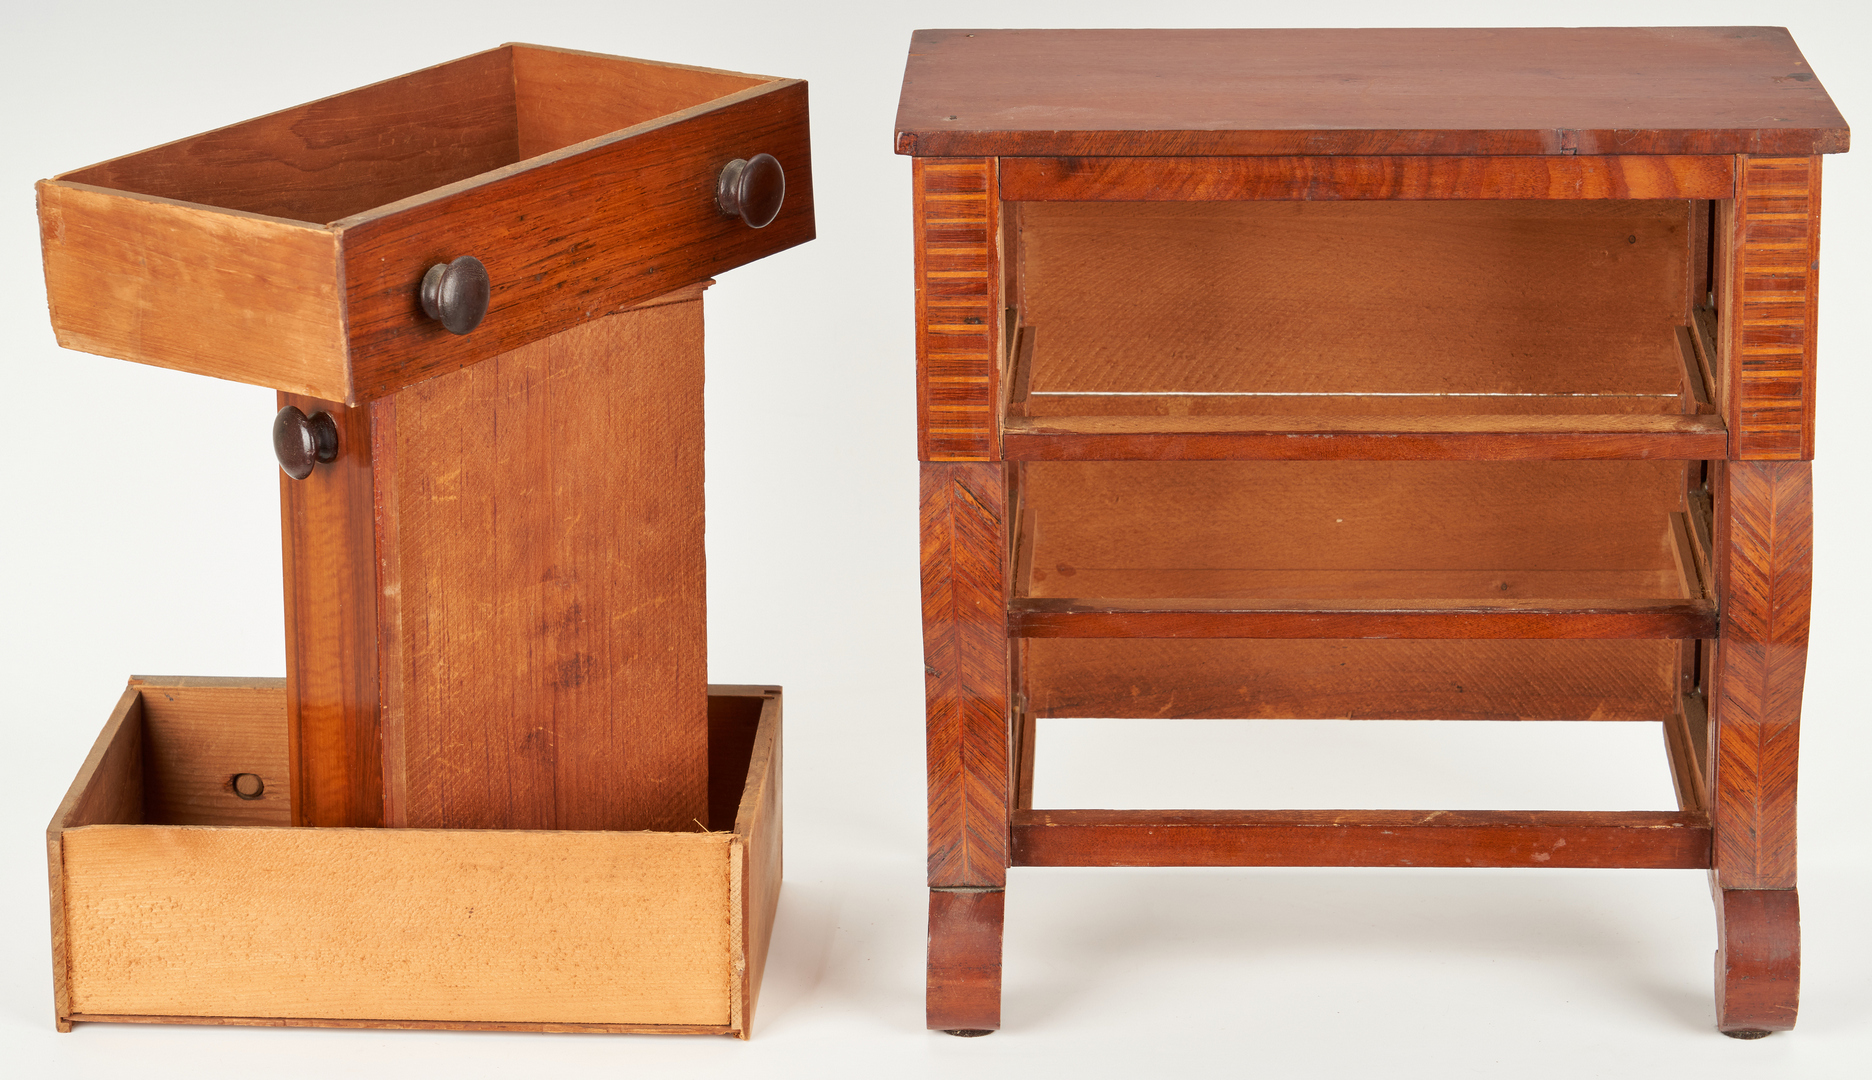 Lot 190: Miniature Chests and Table, incl. Birdseye and Tiger Maple